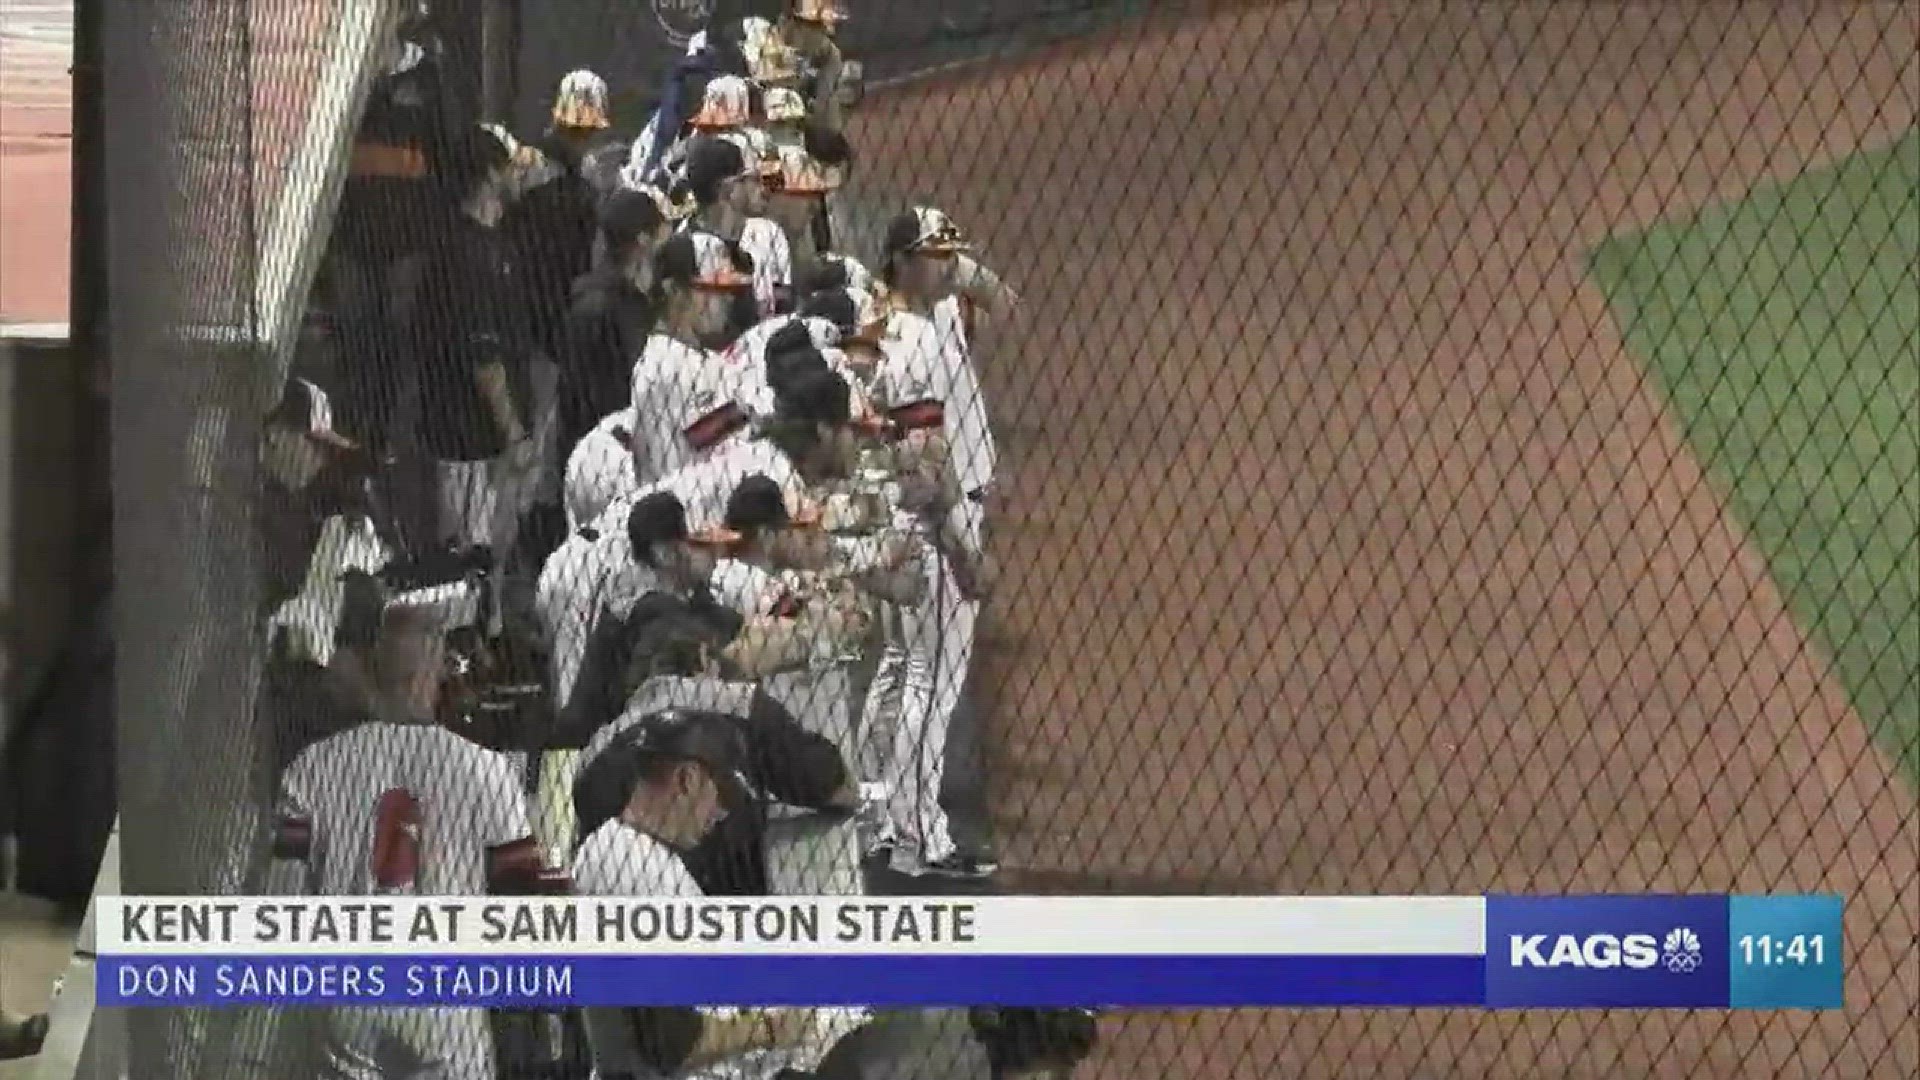 Sam Houston State gave up a 9th inning grand slam to Kent State as the Bearkats dropped their season opener 7-4.